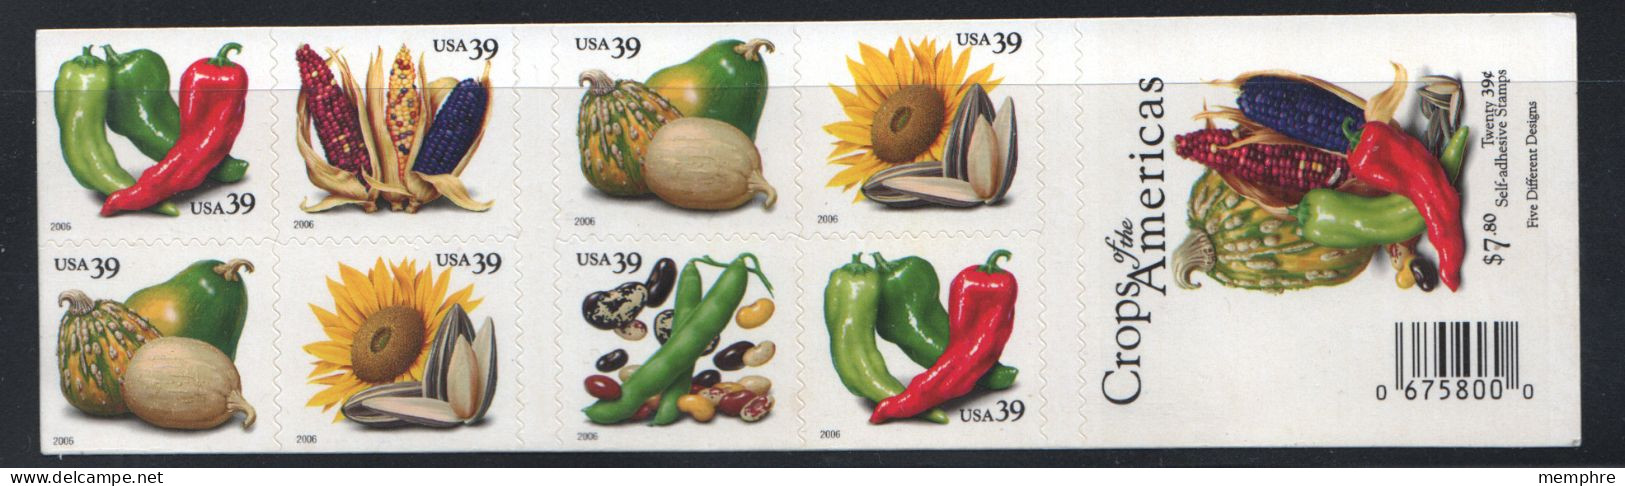 2006  Crops Of The Americas' Chili Peppers, Beans, Sunflower, Squashes, Corn Booklet Of 20 Sc 4012b - Unused Stamps